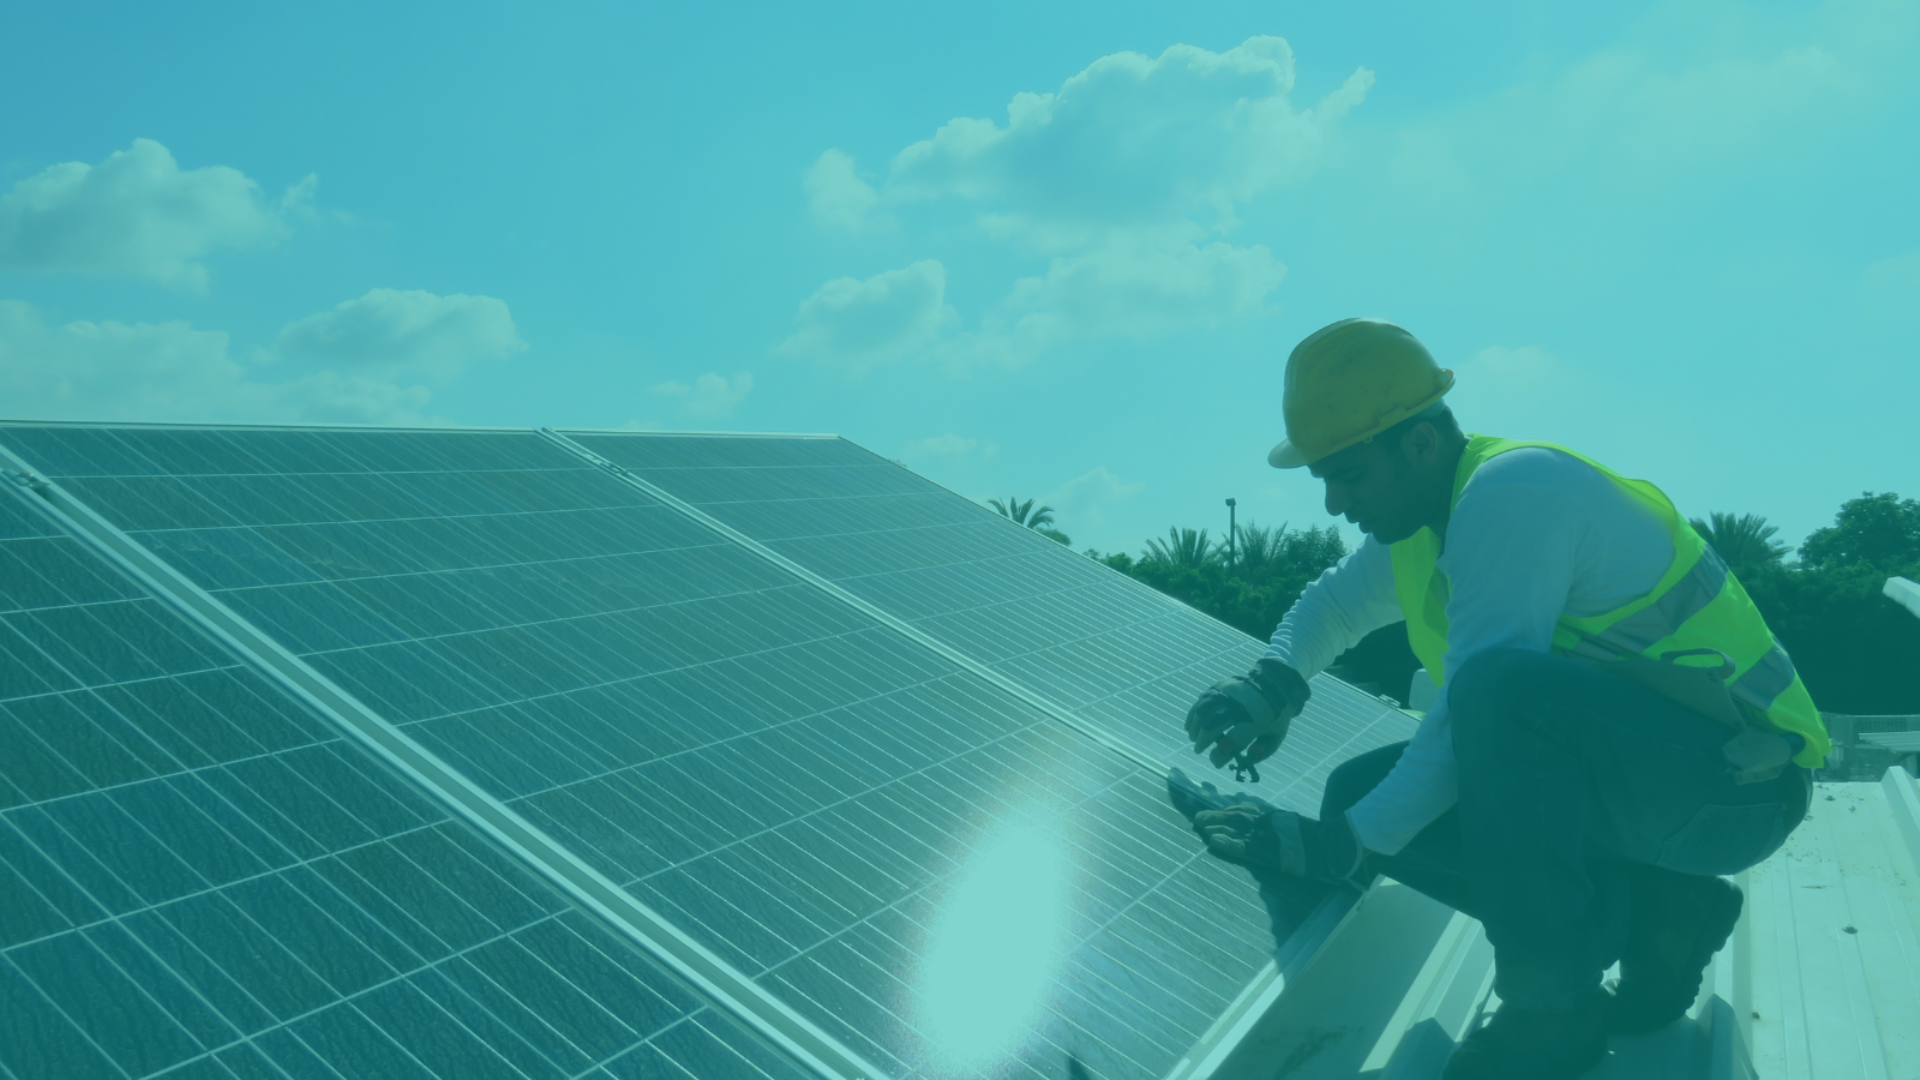 An image of a man wearing a hard hat and yellow high vis jacket fitting solar panels on a roof